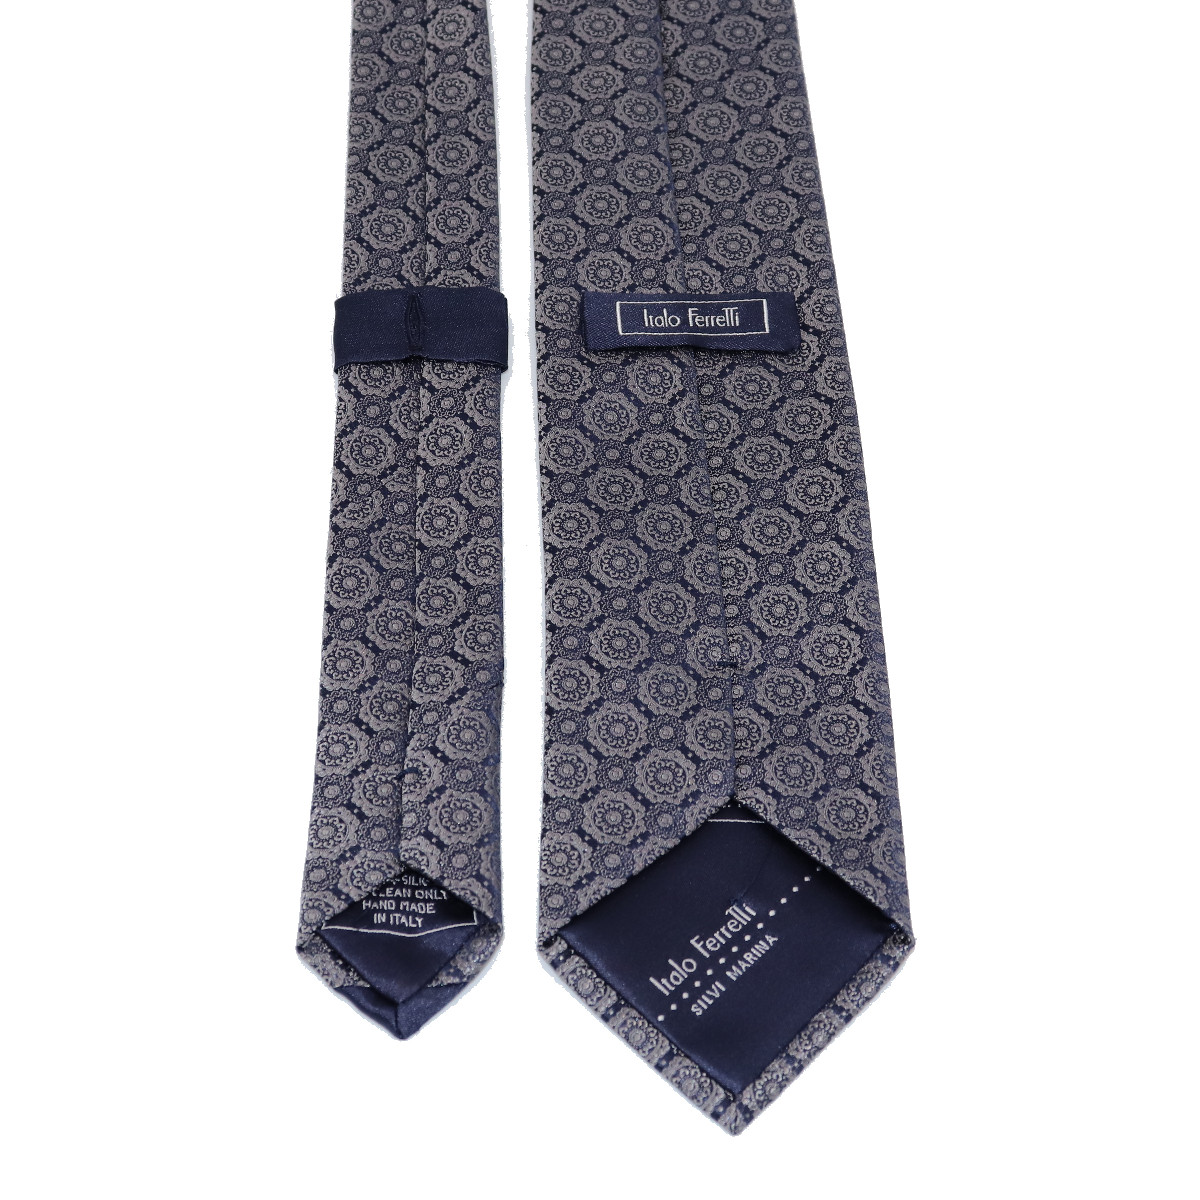 Formal woven silk tie, navy blue backgroung and grey elegant medallions ...